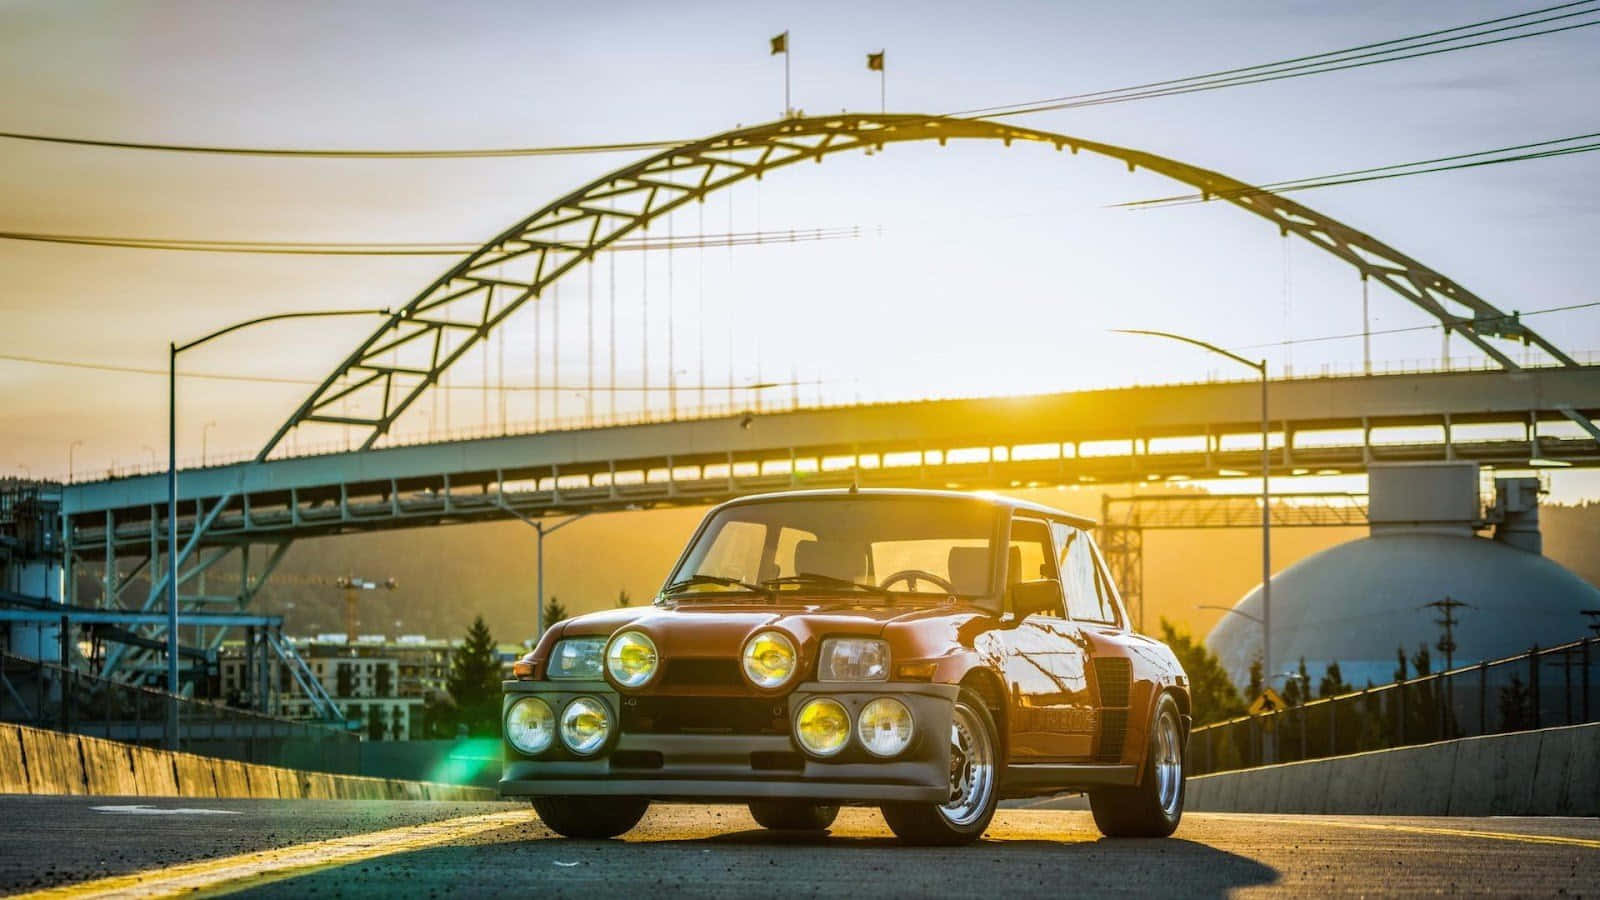 Classic Renault 5 Turbo showcasing its timeless design and performance in a high-definition image Wallpaper